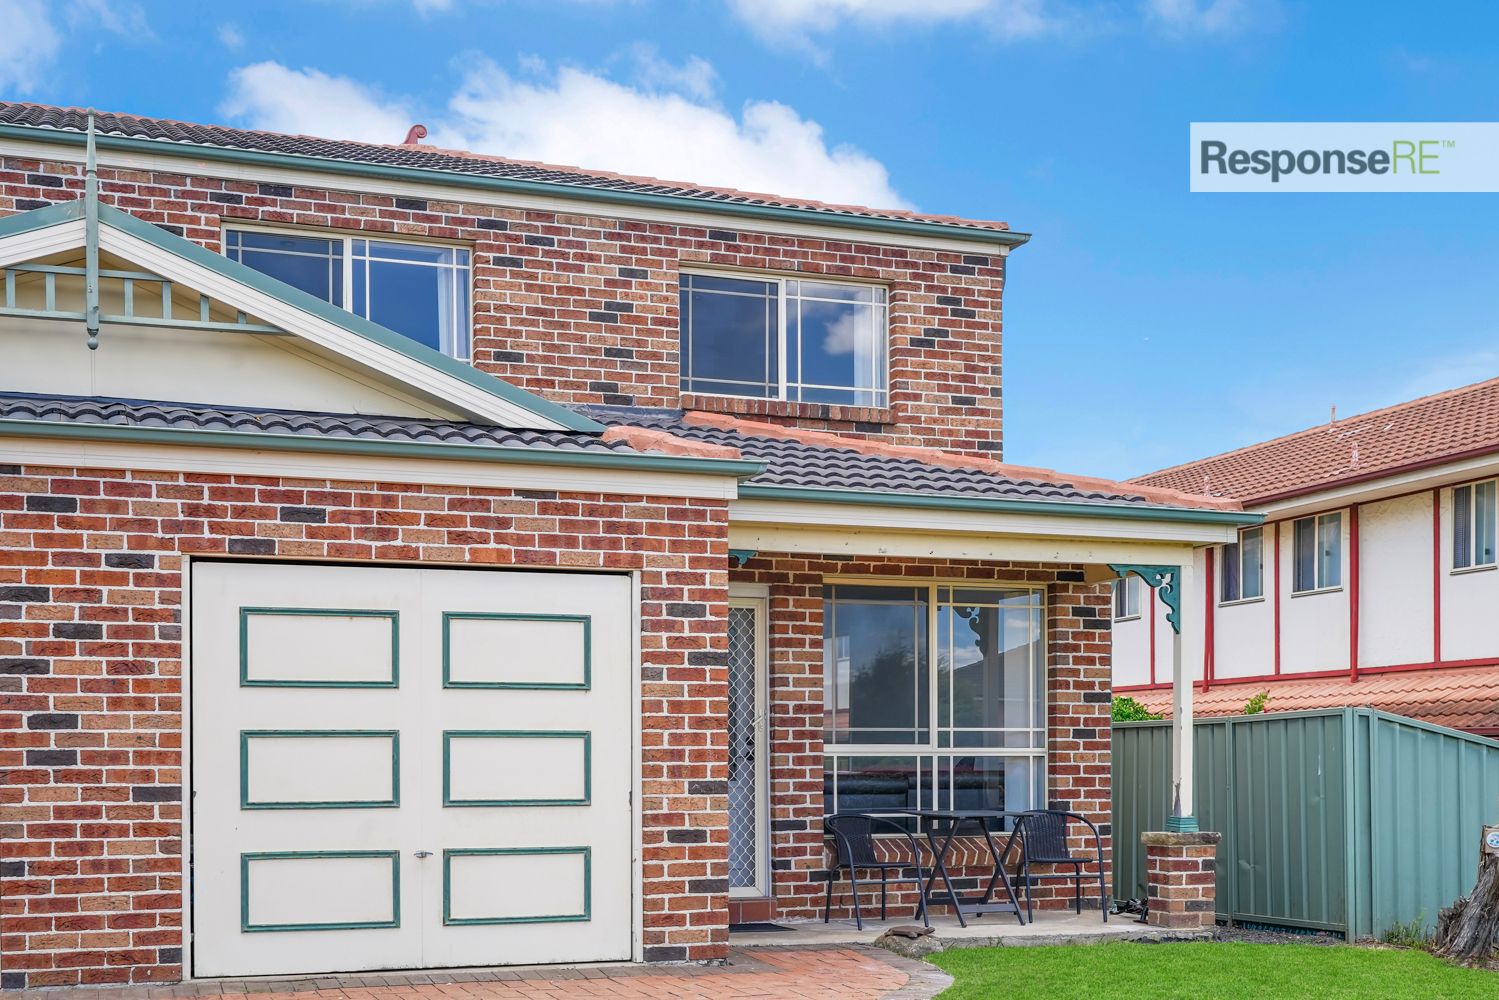 3 bedrooms Semi-Detached in 2/42 Luttrell Street GLENMORE PARK NSW, 2745